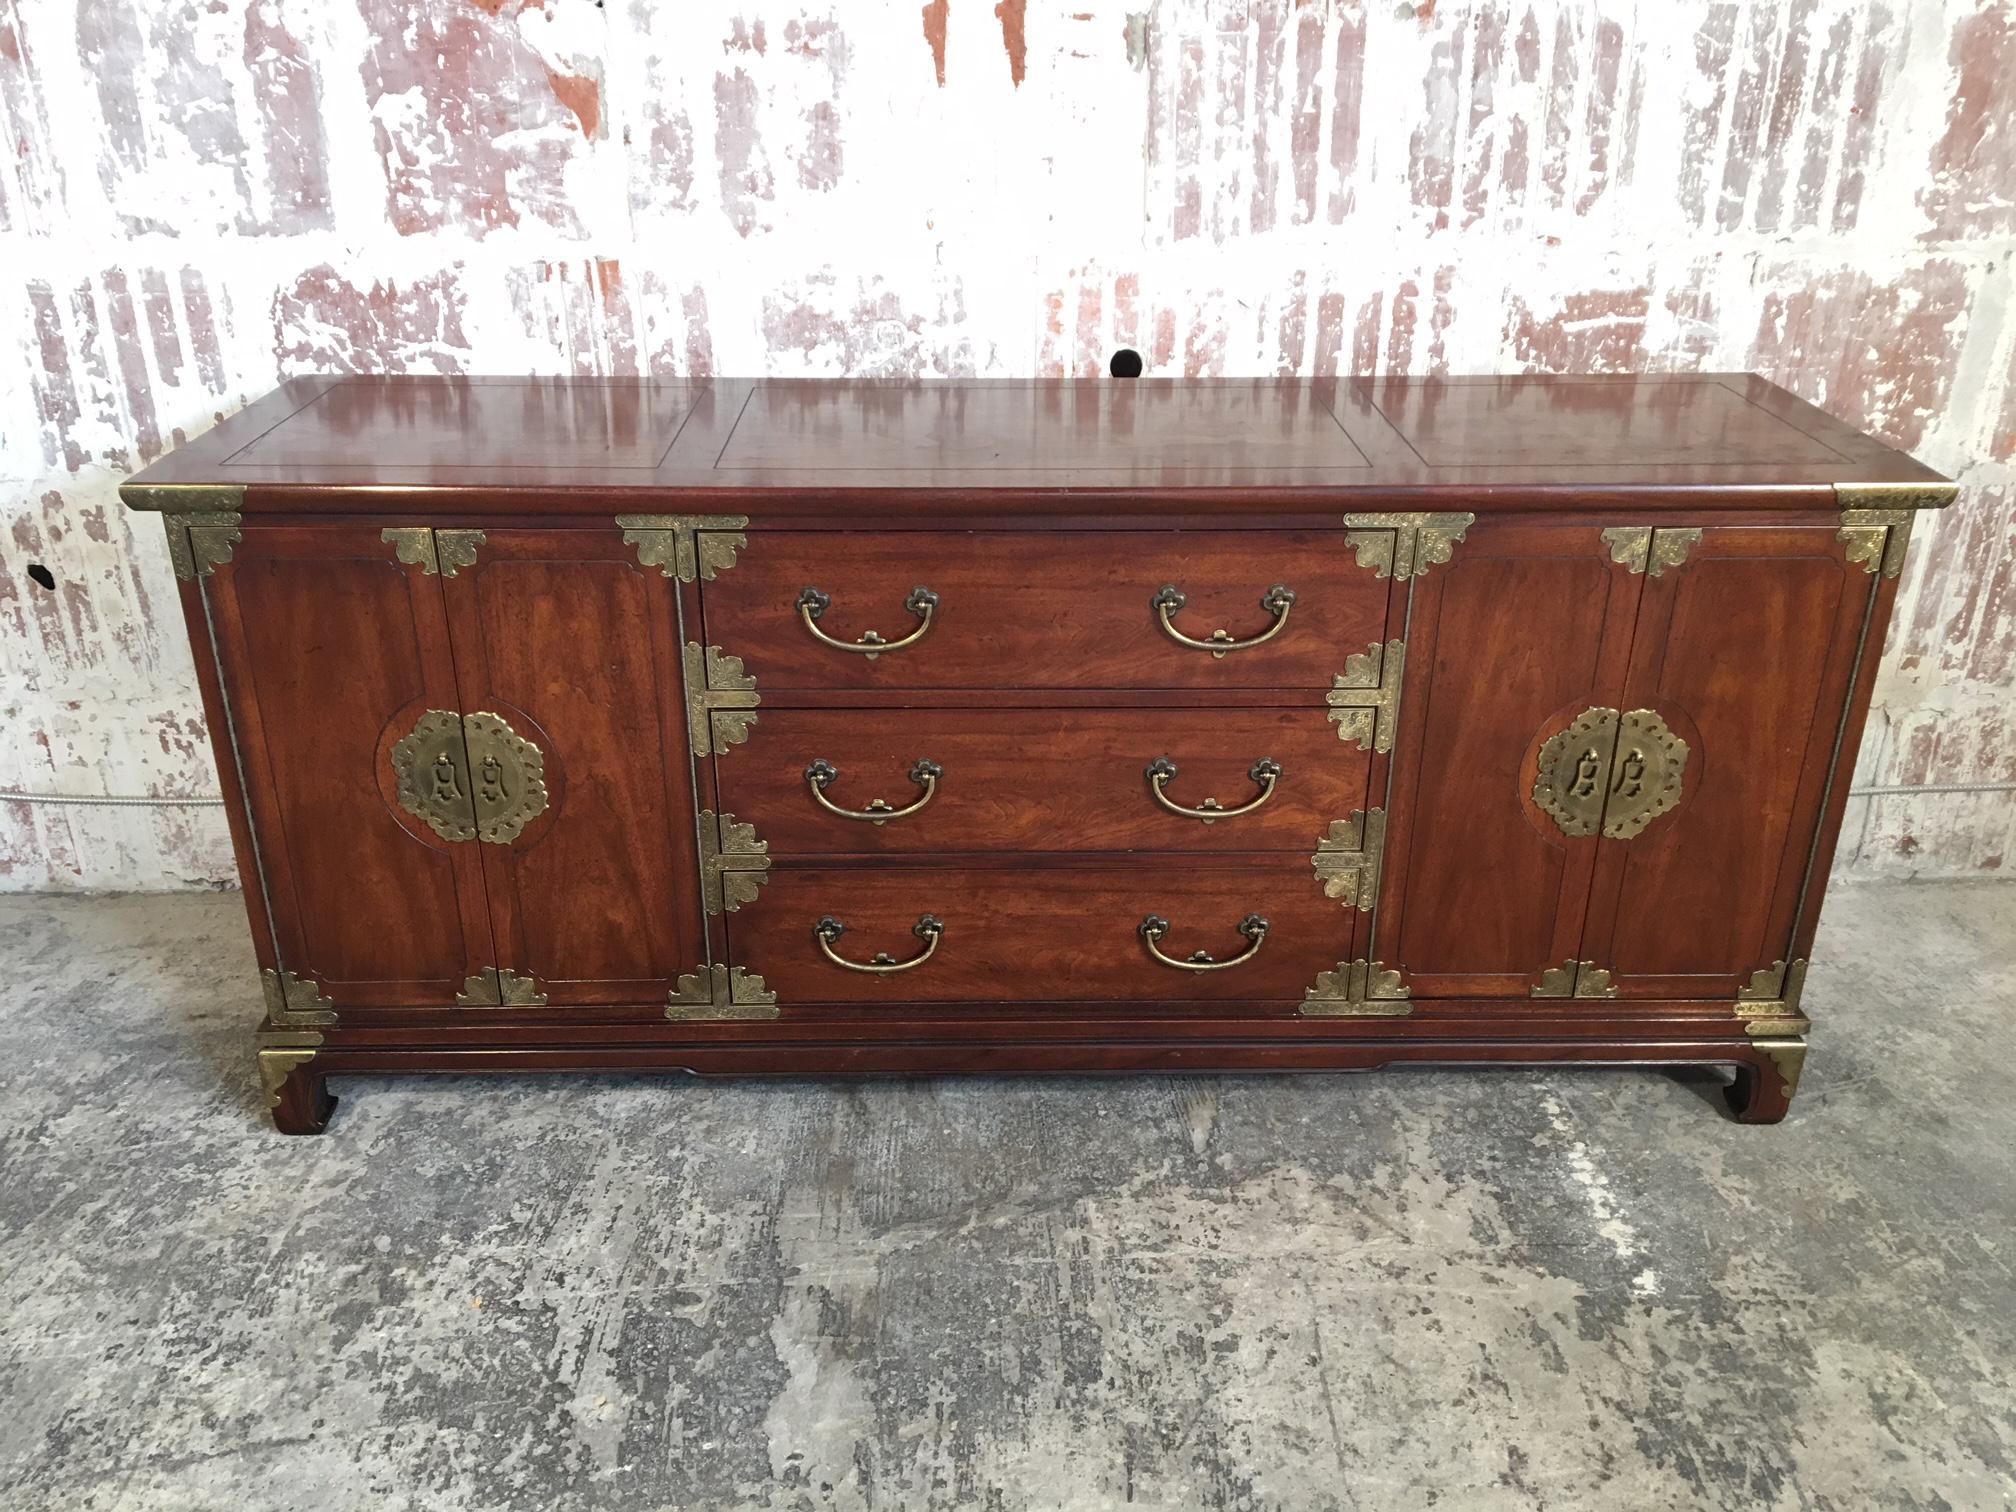 Midcentury server or buffet by Henredon in Asian chinoiserie style features generous brass detailing and solid wood construction. Good vintage condition with age appropriate signs of wear.